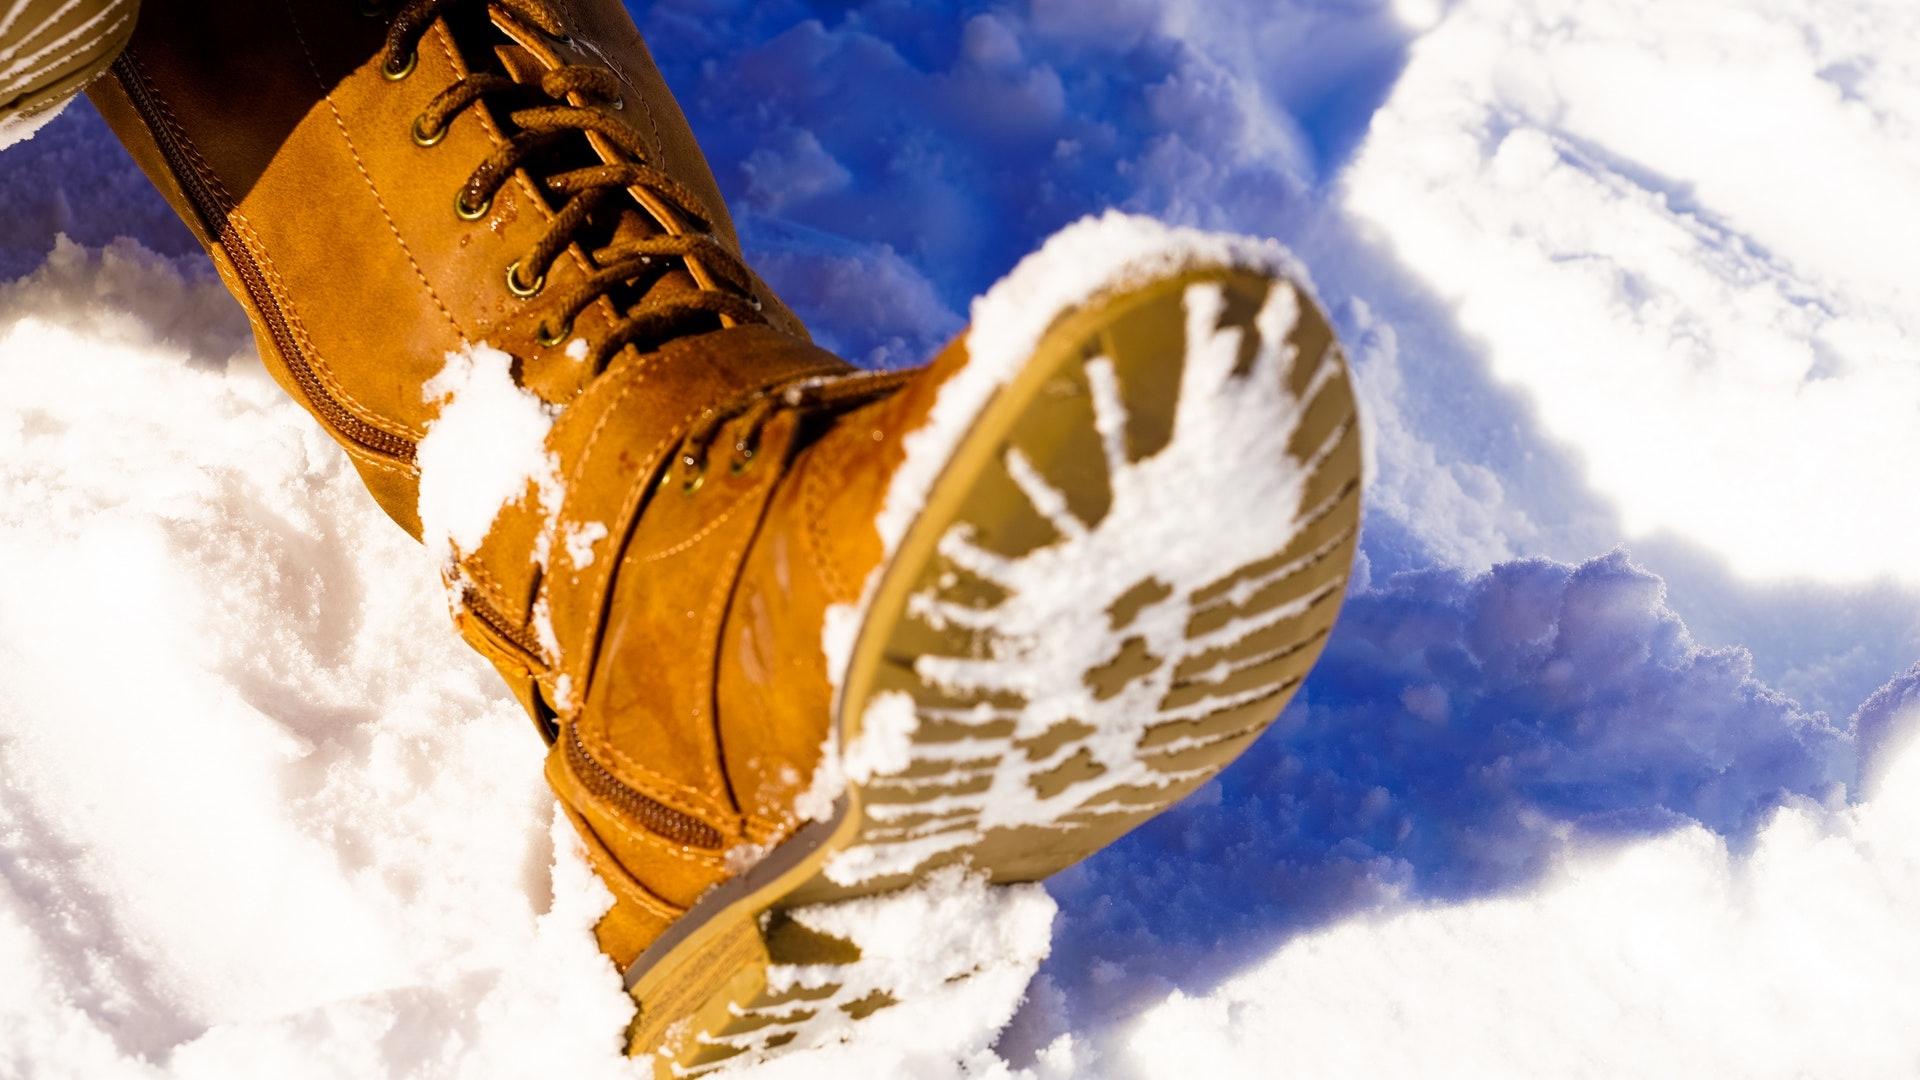 These boots were made for crushing tiny ice crystals. Crunch. (Nikita Khandelwal / Pexels)